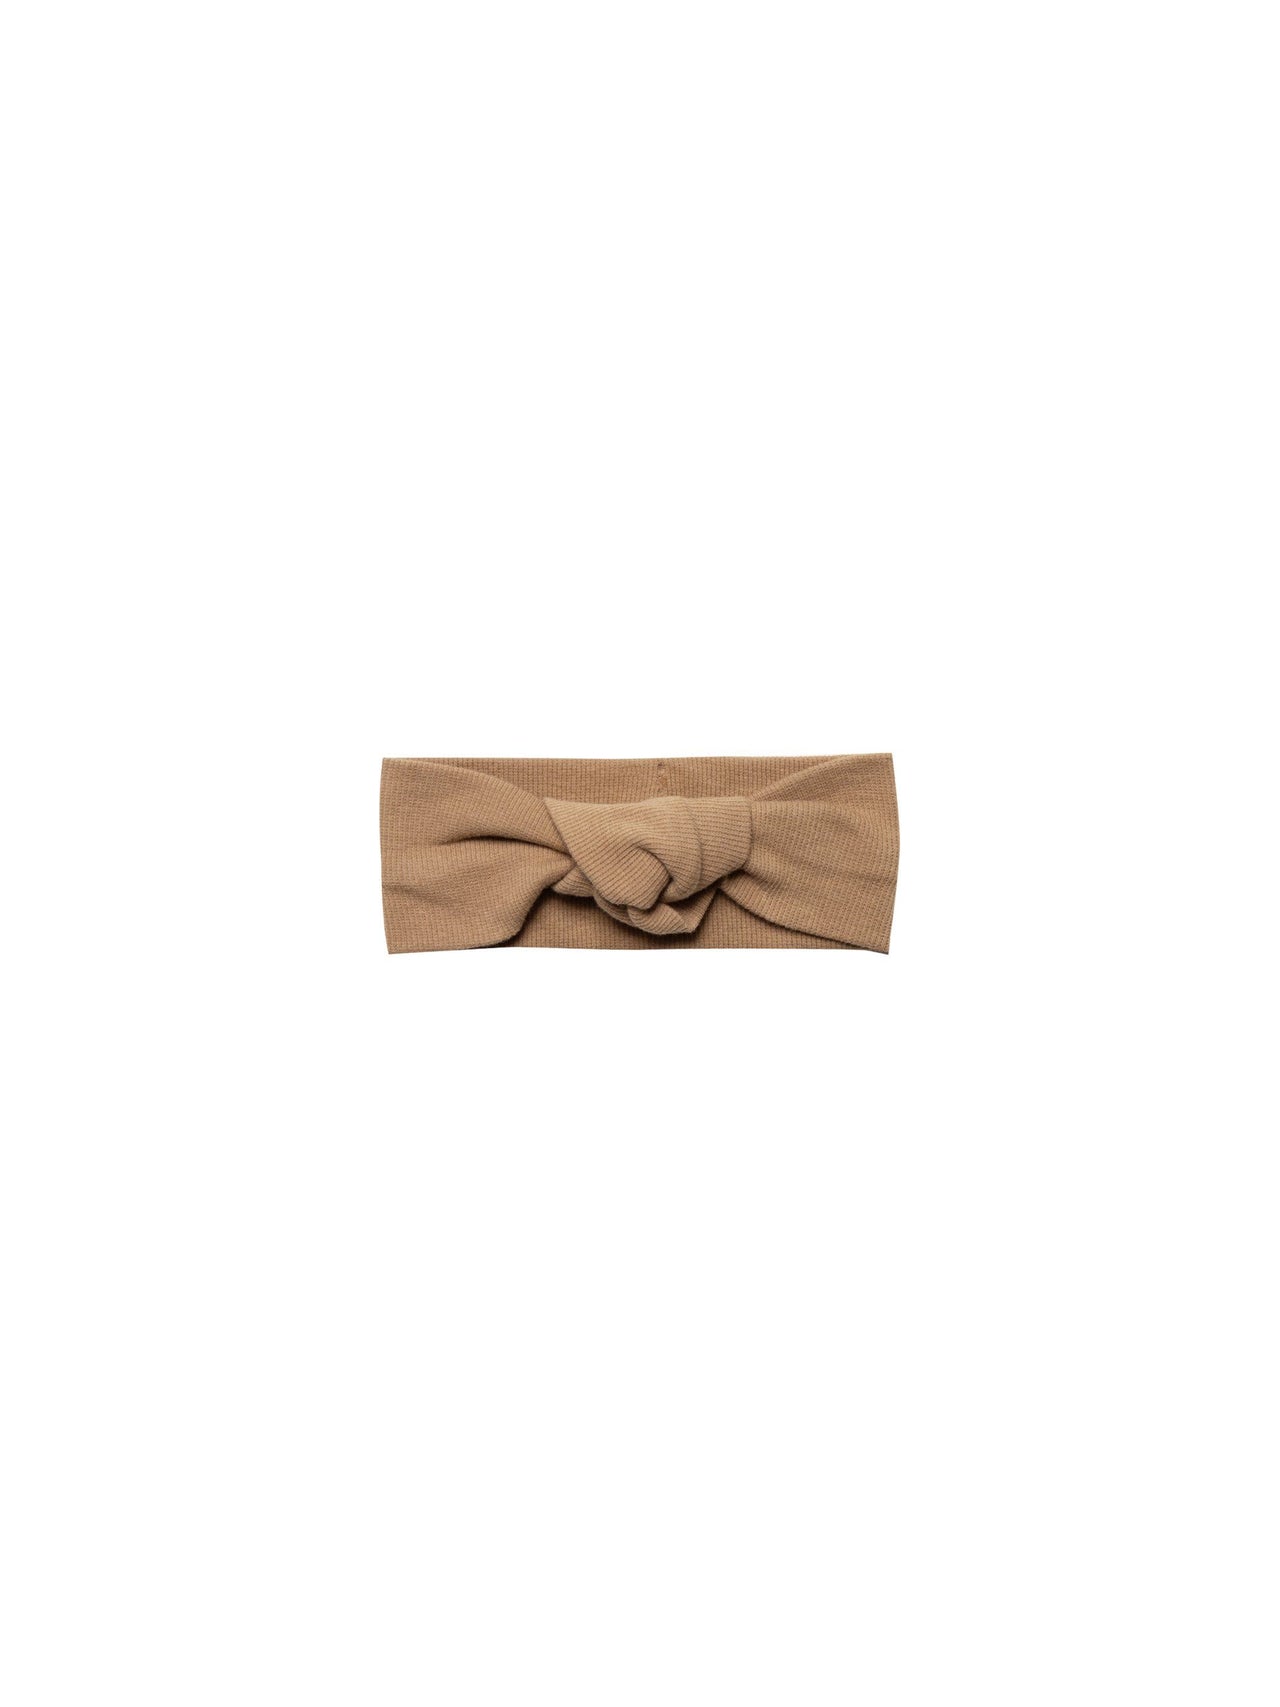 Quincy Mae Organic Ribbed Baby Turban, Copper